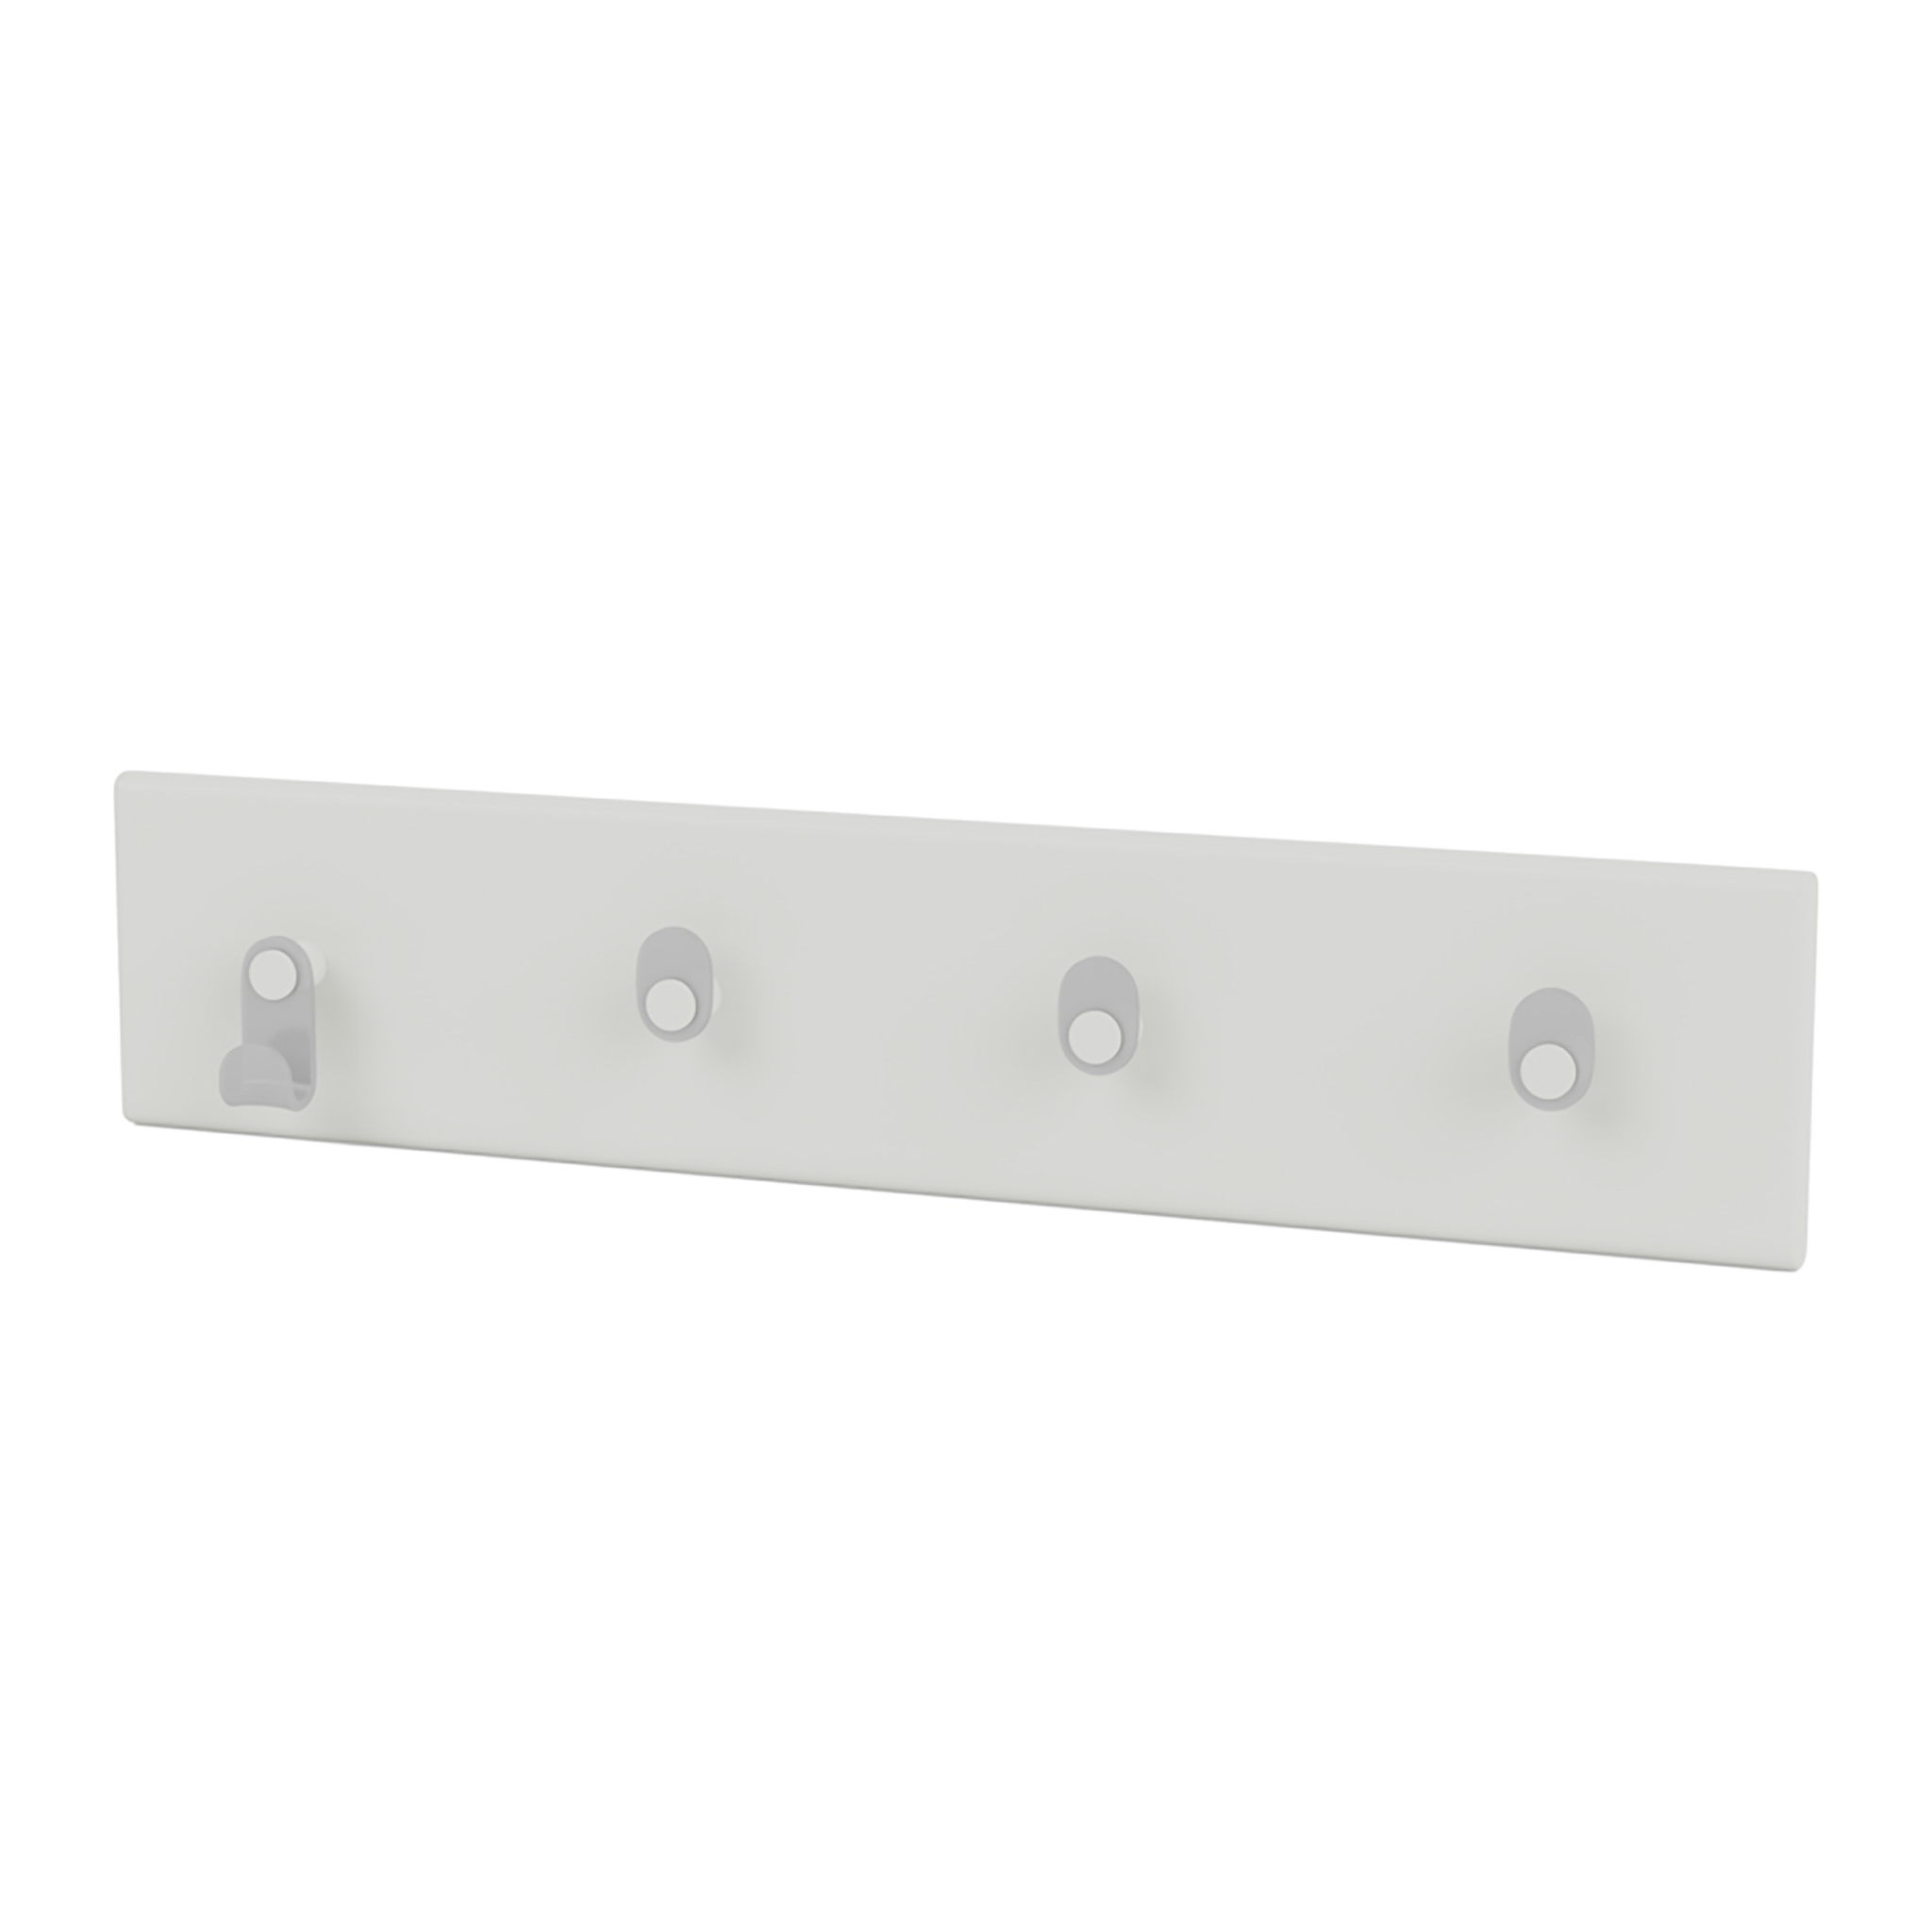 MONTANA // K812 - HOOK RAIL WITH FOUR BUTTONS | 09 NORDIC